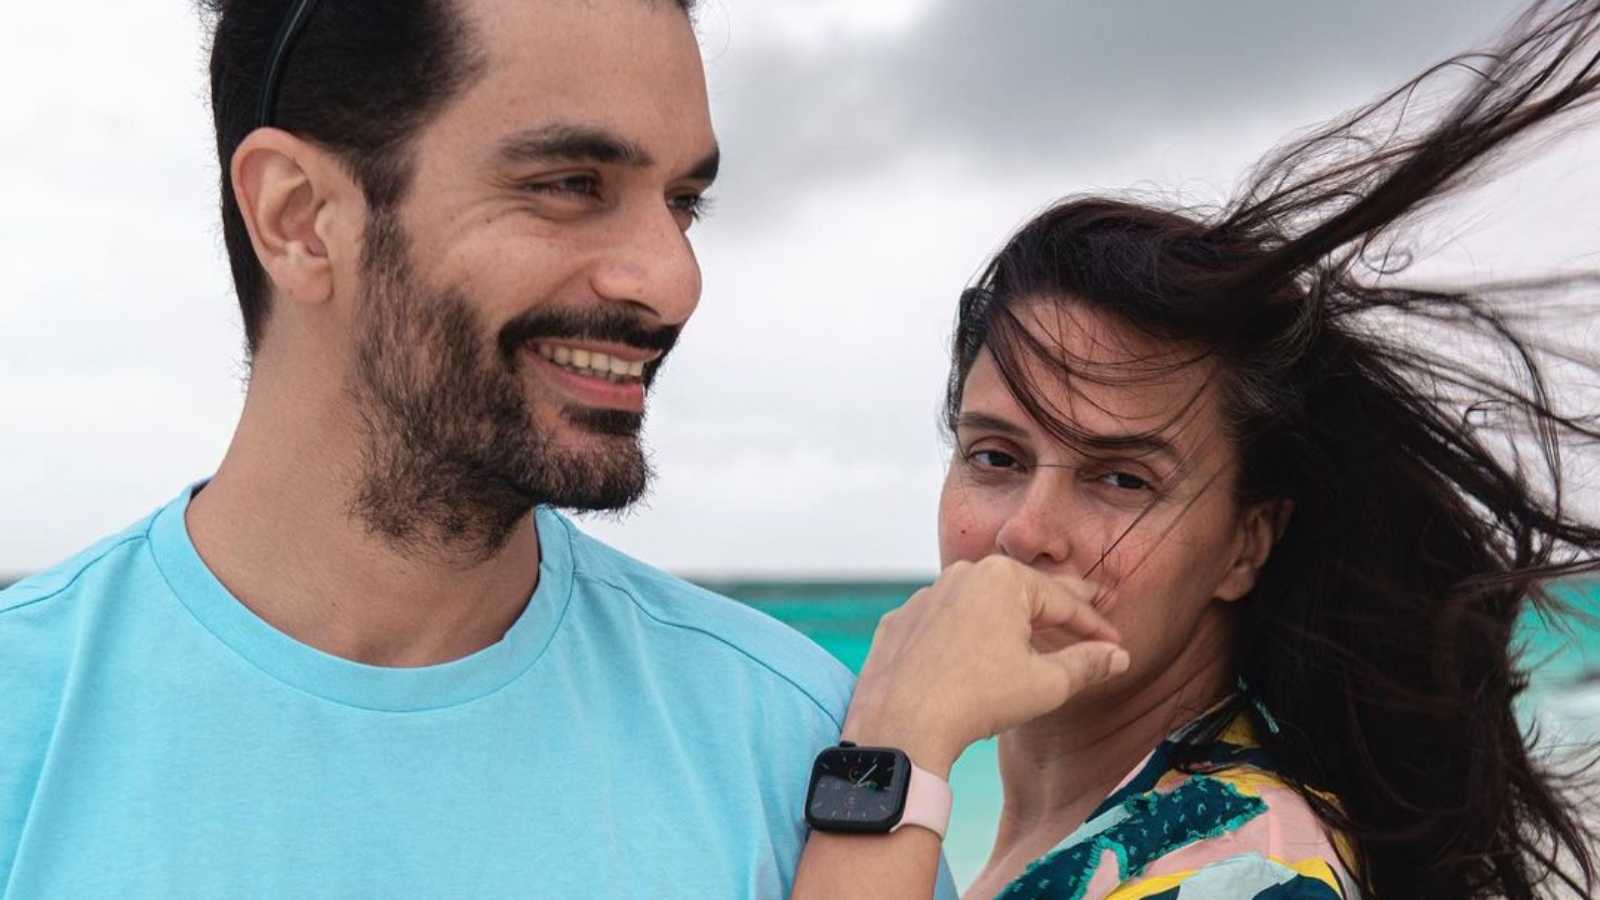 Angad Bedi can't wait to spend wife Neha Dhupia's money as she turns 42: 'Time to put some loose in that luicy'